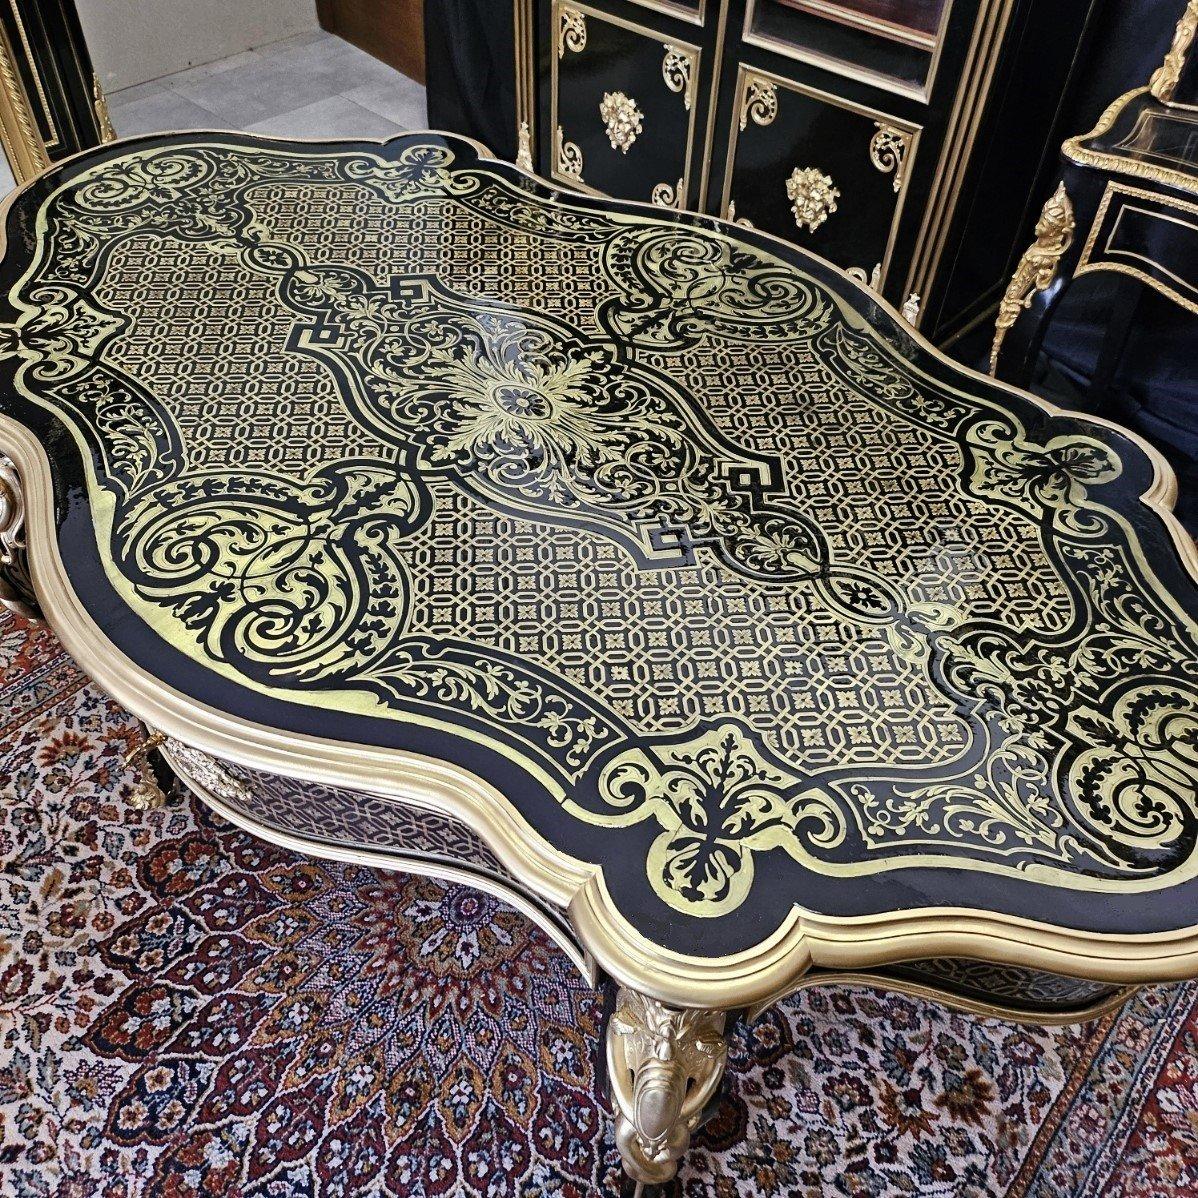 Diehl Black French Table Napoleon III Boulle Brass Gilt Bronze 19th Century For Sale 7